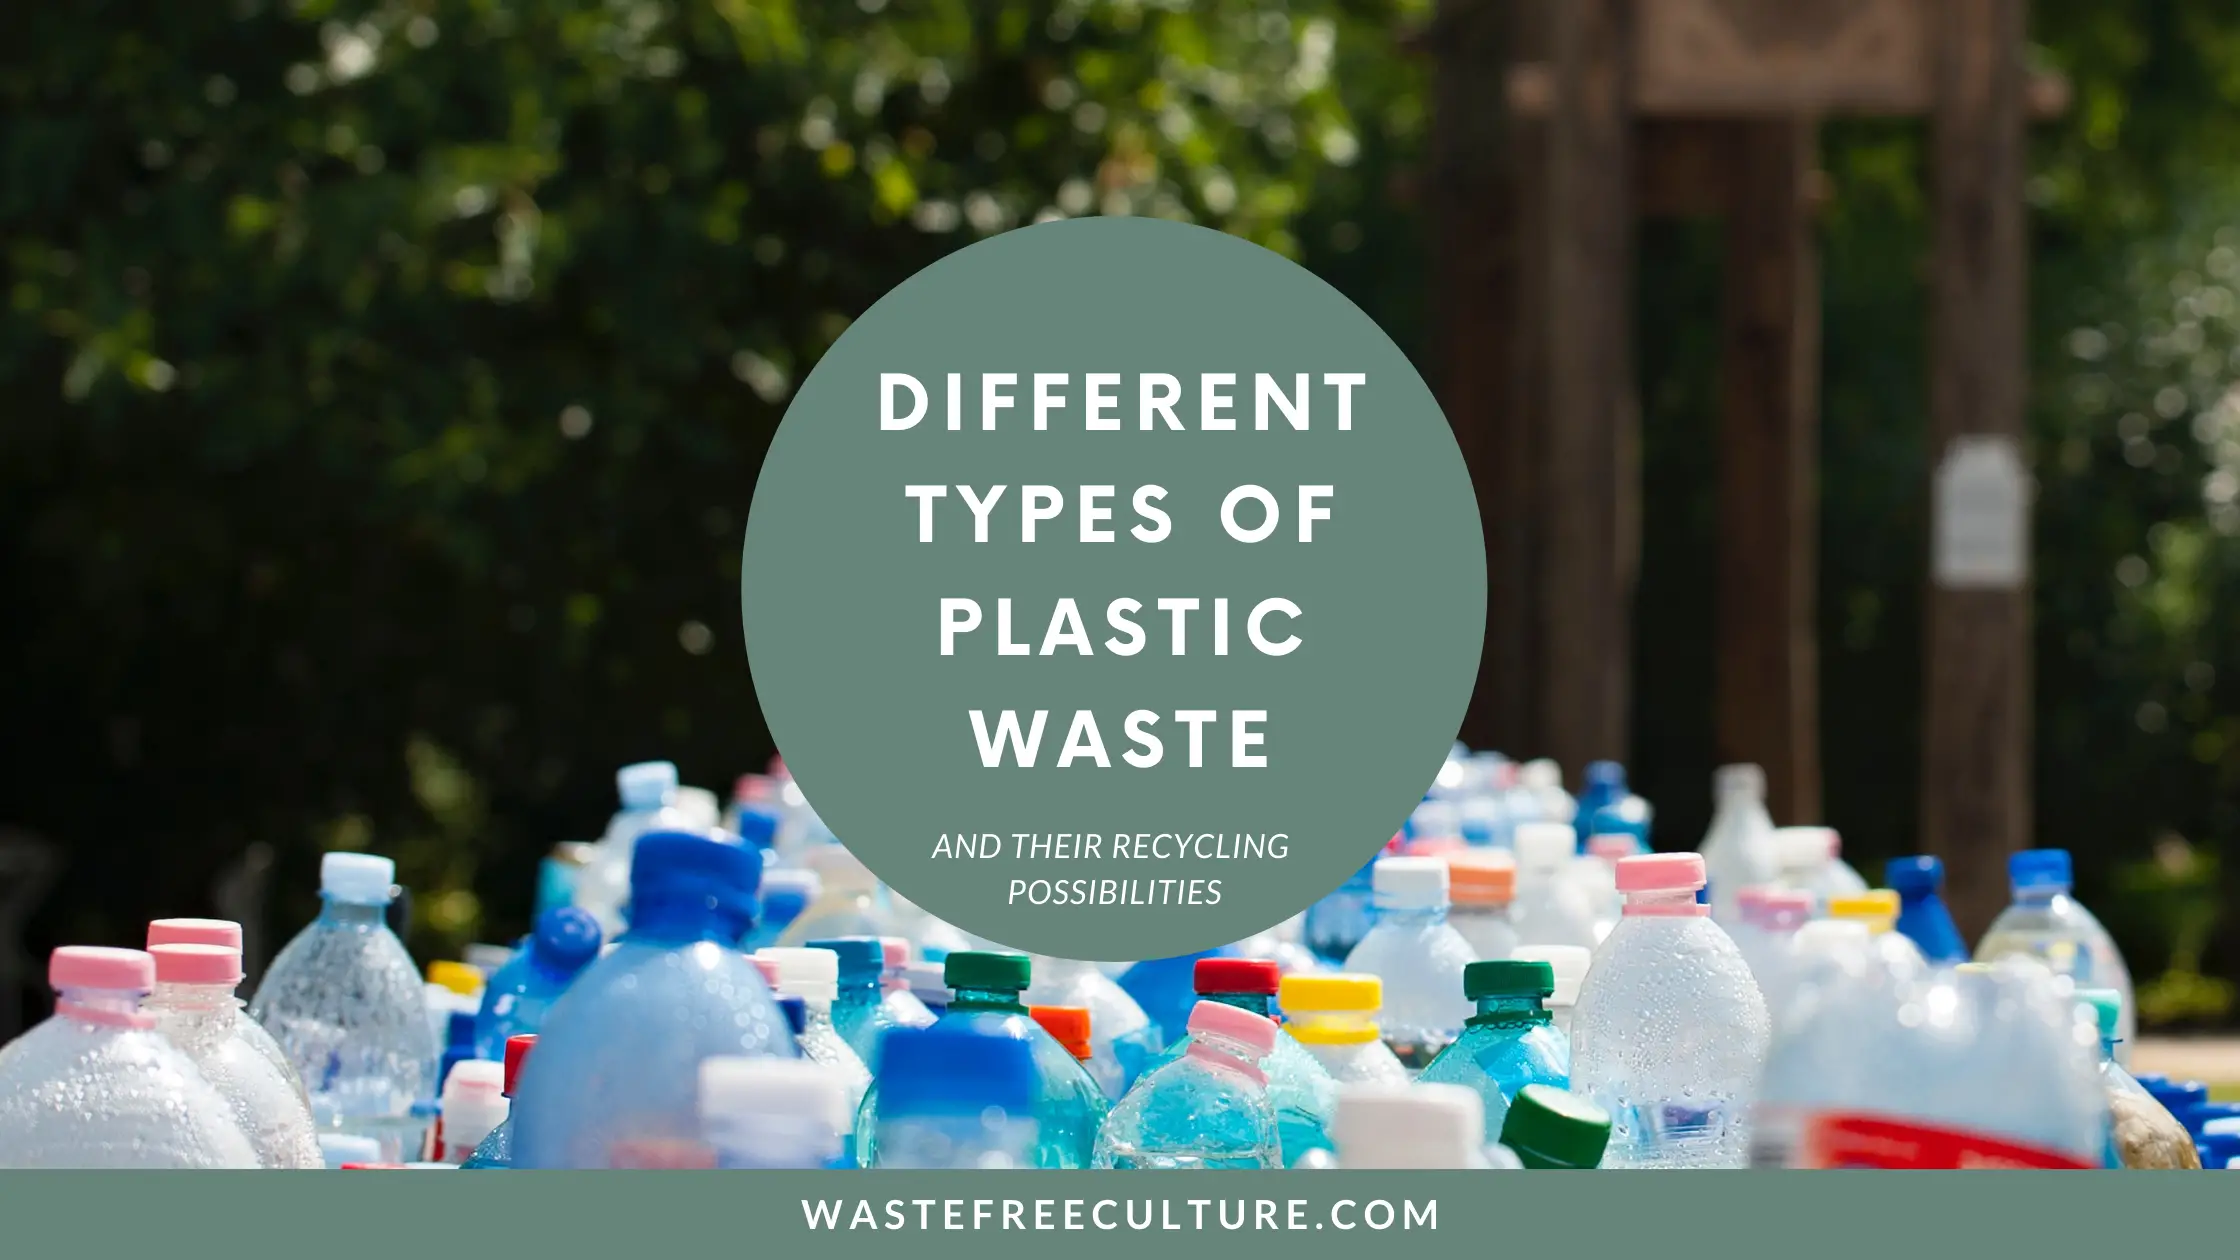 Different Types of Plastic Waste & Plastic Recycling